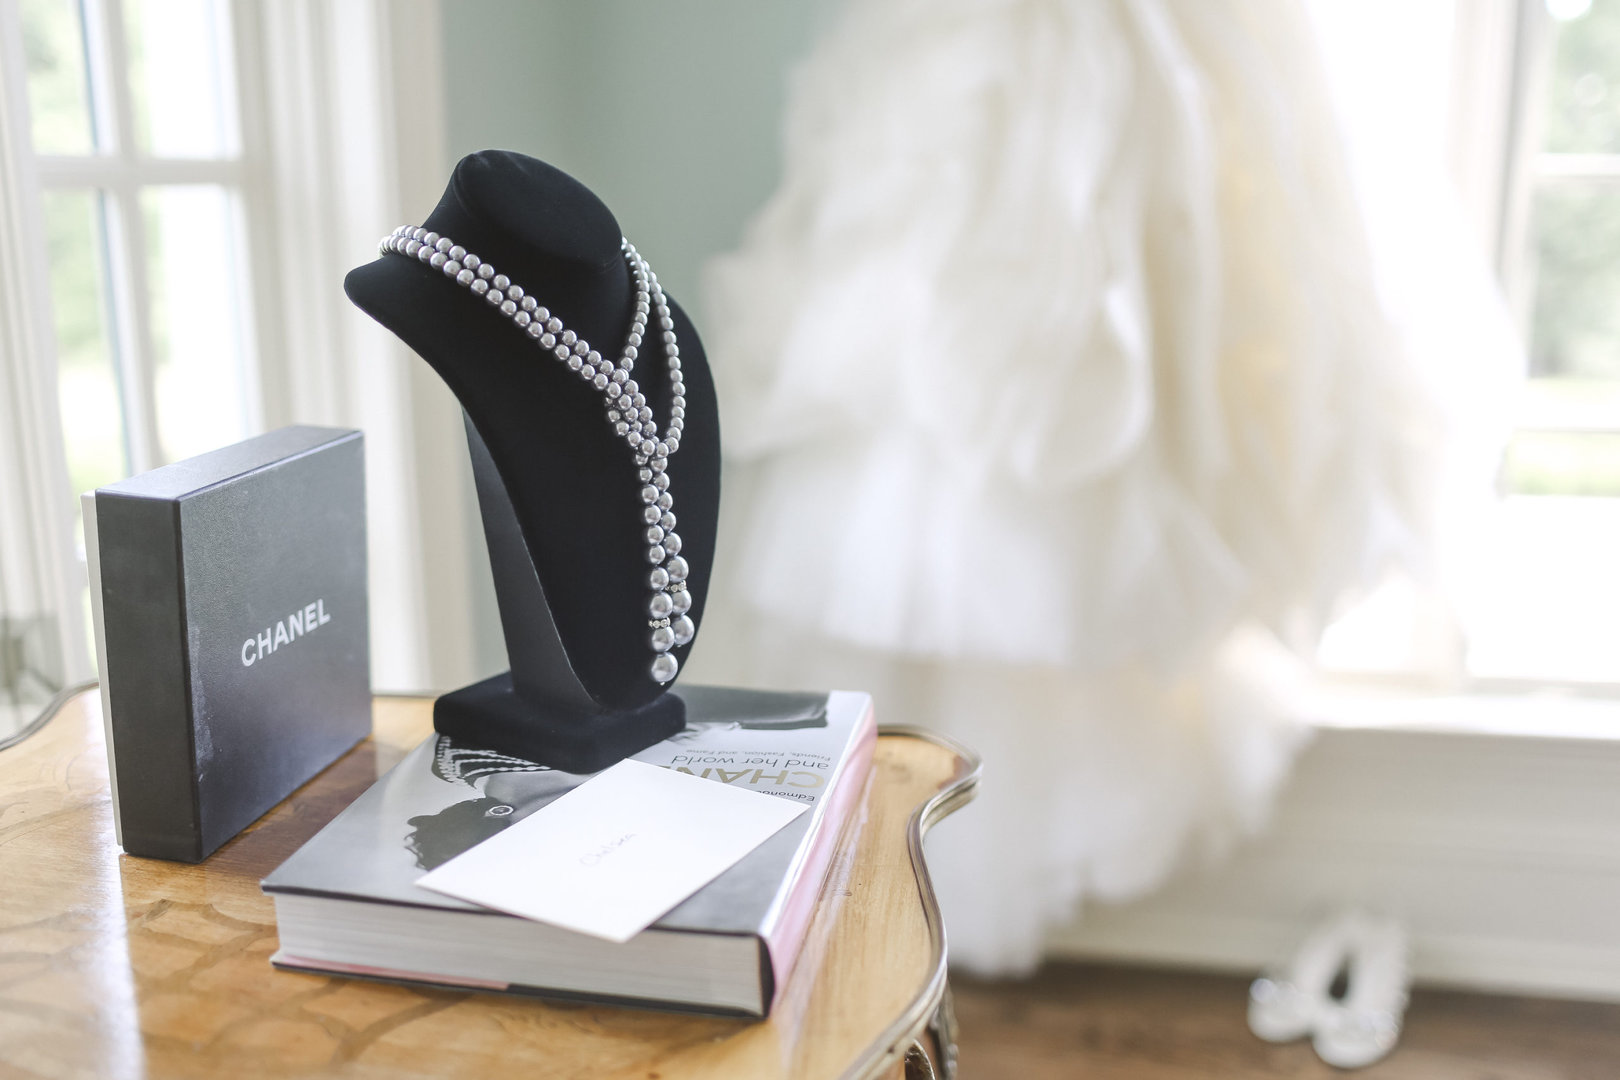 Luxury Estate Wedding Photography setup with a designer gown, vintage chanel necklace as a wedding gift for the bride